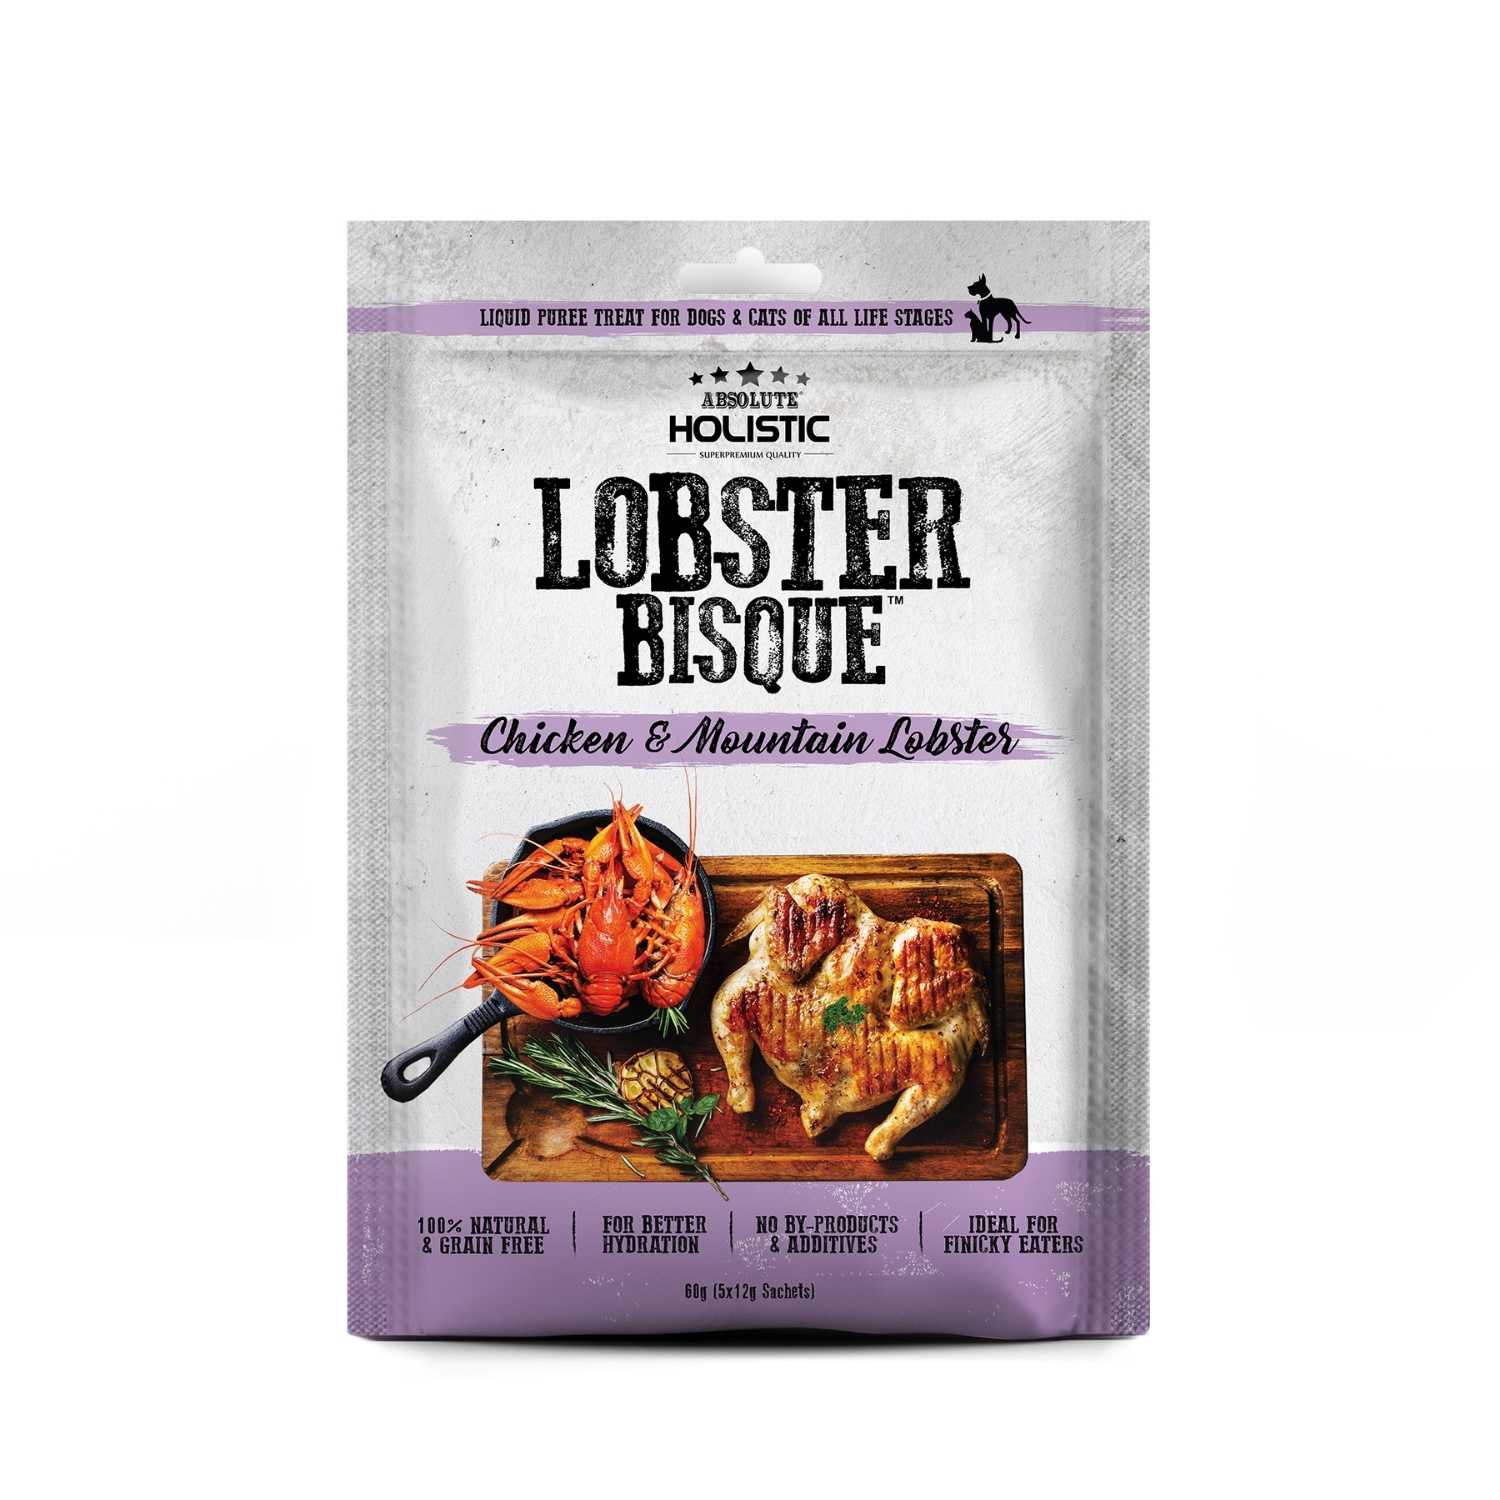 Absolute Holistic - Lobster Bisque (chicken & mountain lobster) - Dog & Cat 5x12g Treats